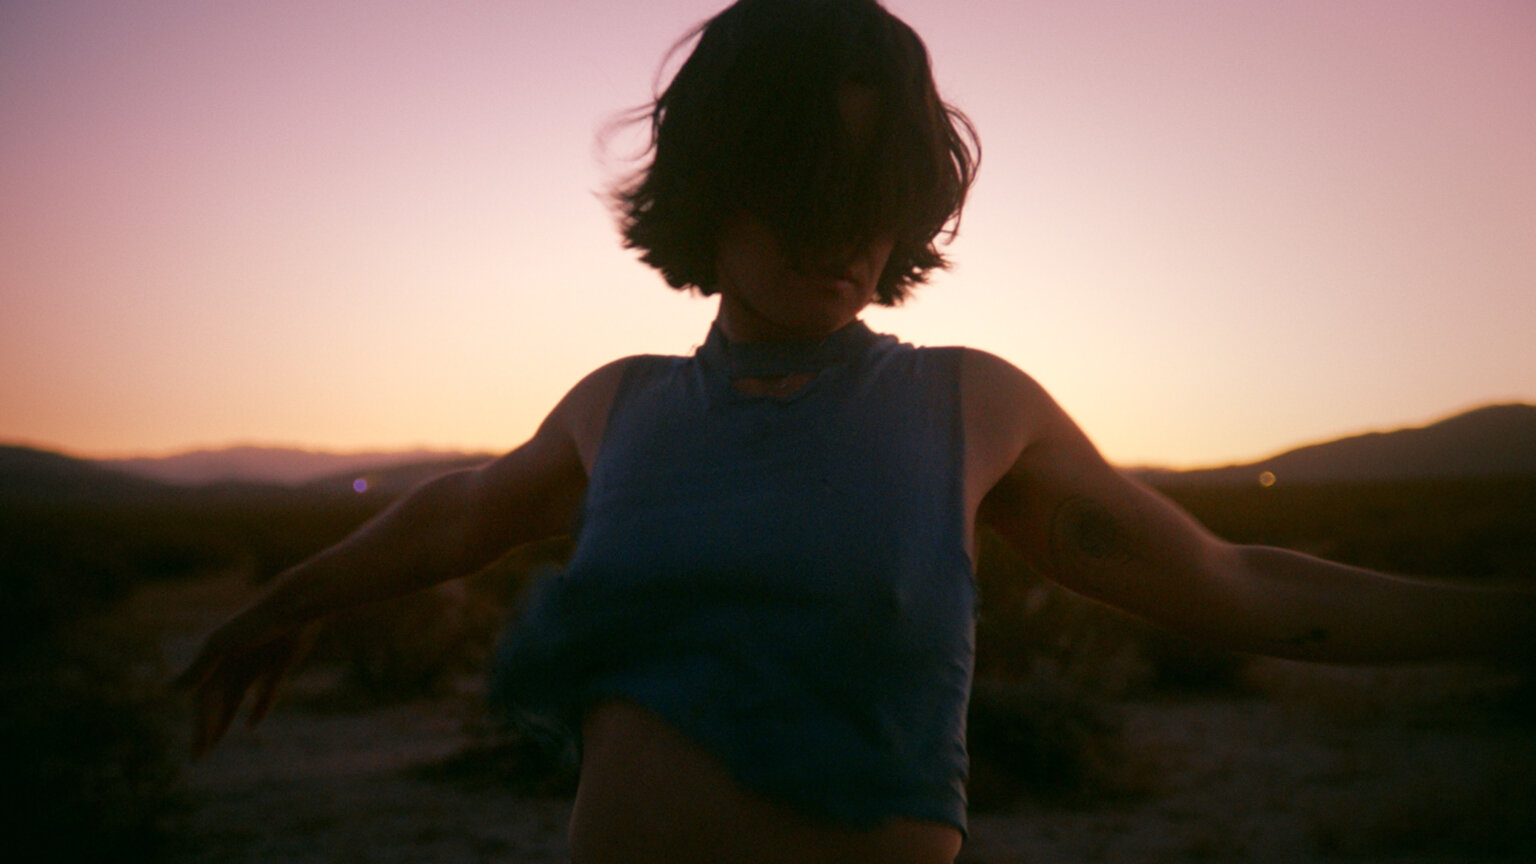 Singer/songwriter Adrianne Lenker (Big Thief) has shares a new, self-directed video for “forwards beckon rebound", the track is out via 4AD